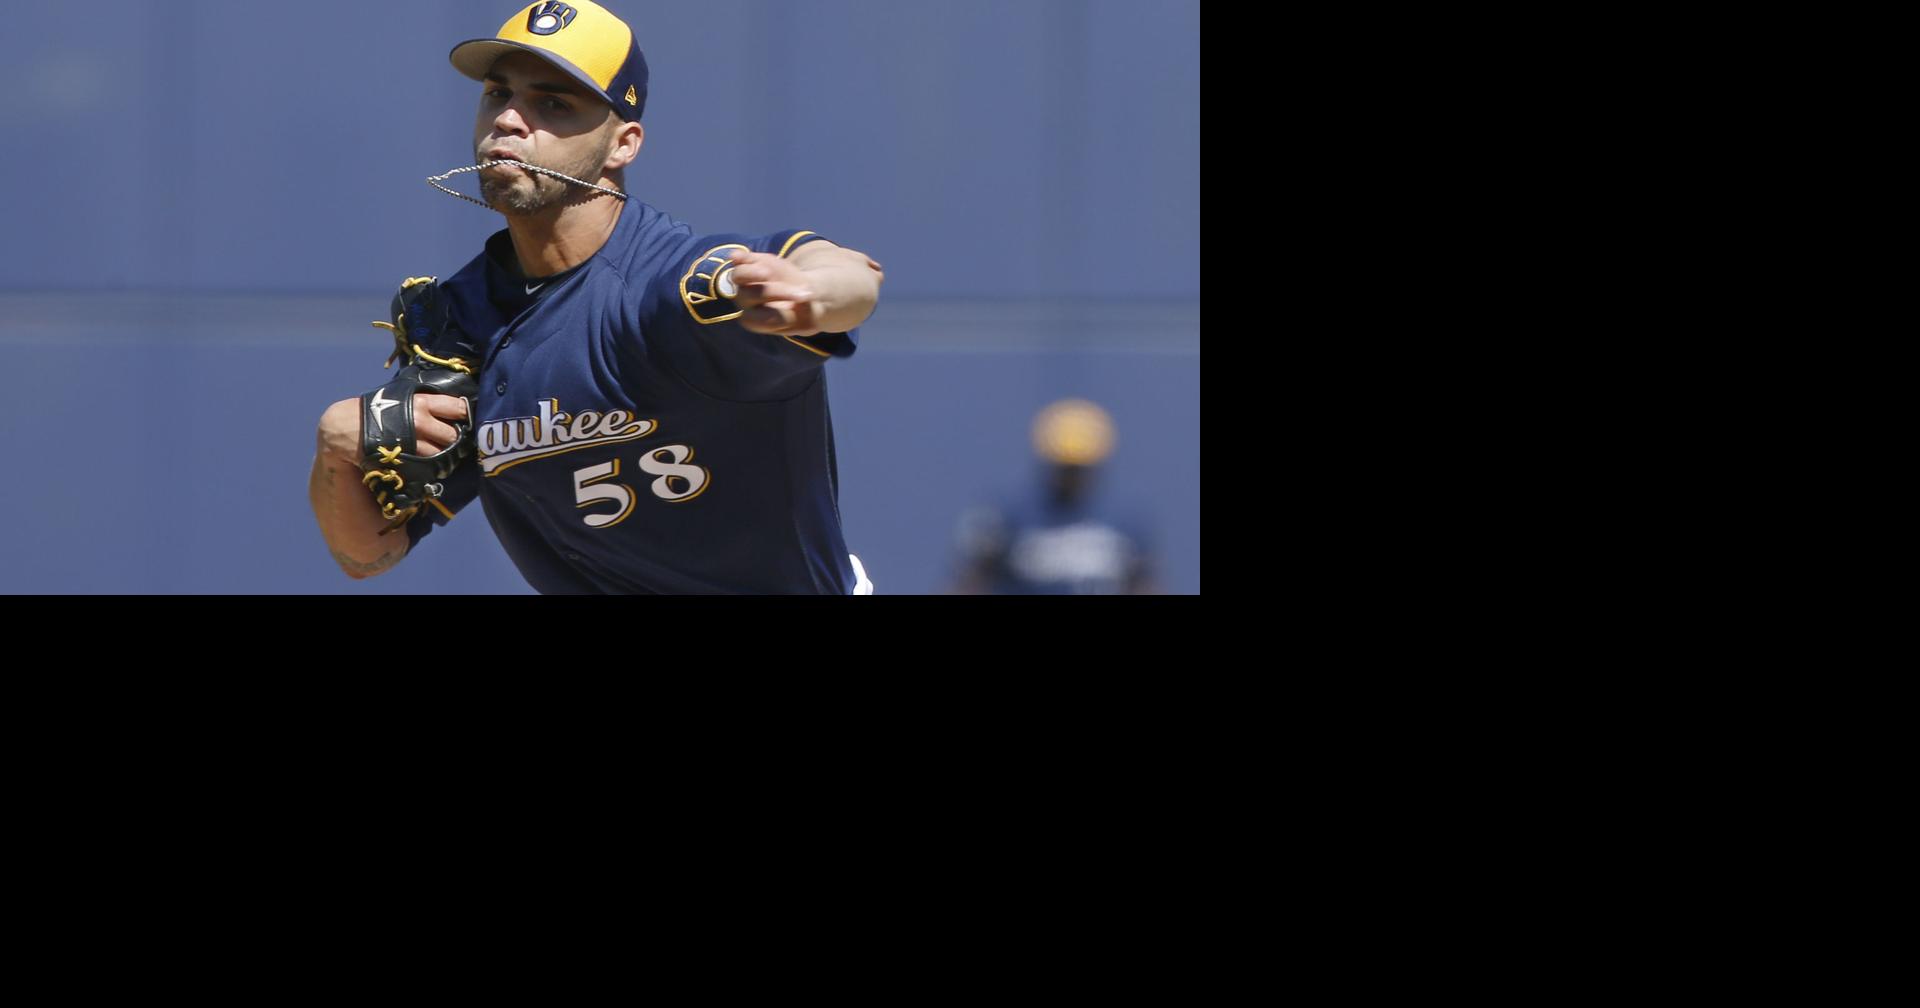 Manager Craig Counsell talks about pitcher Alex Claudio leading